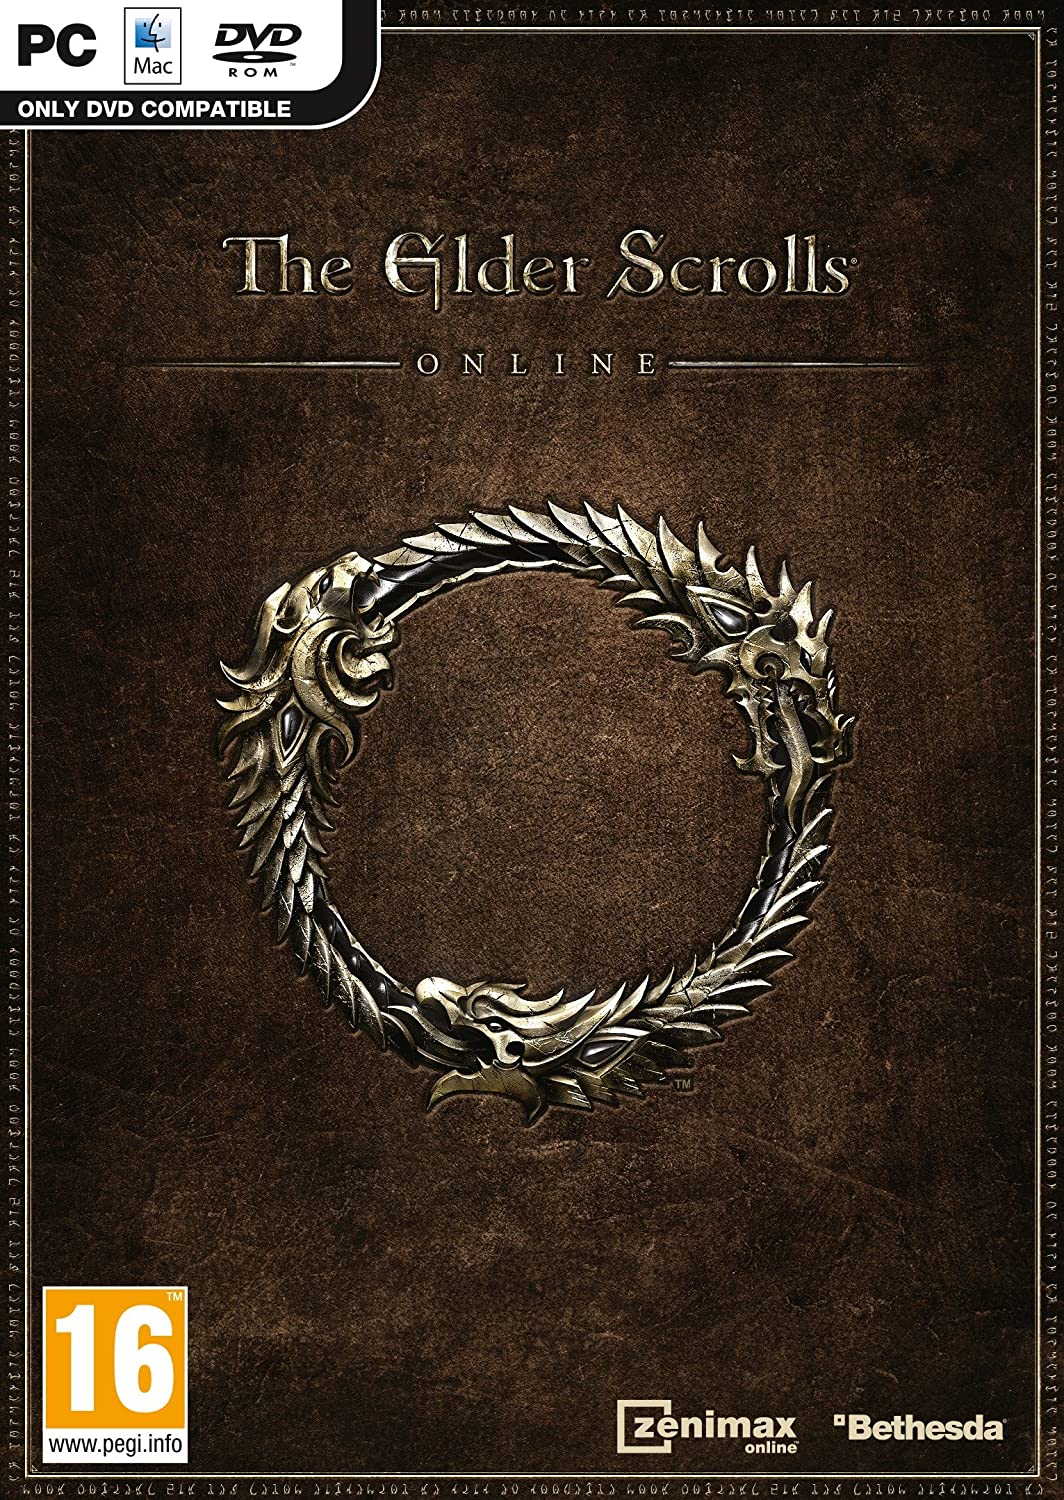 The Elder Scrolls Online with Explorers Pack [PC]